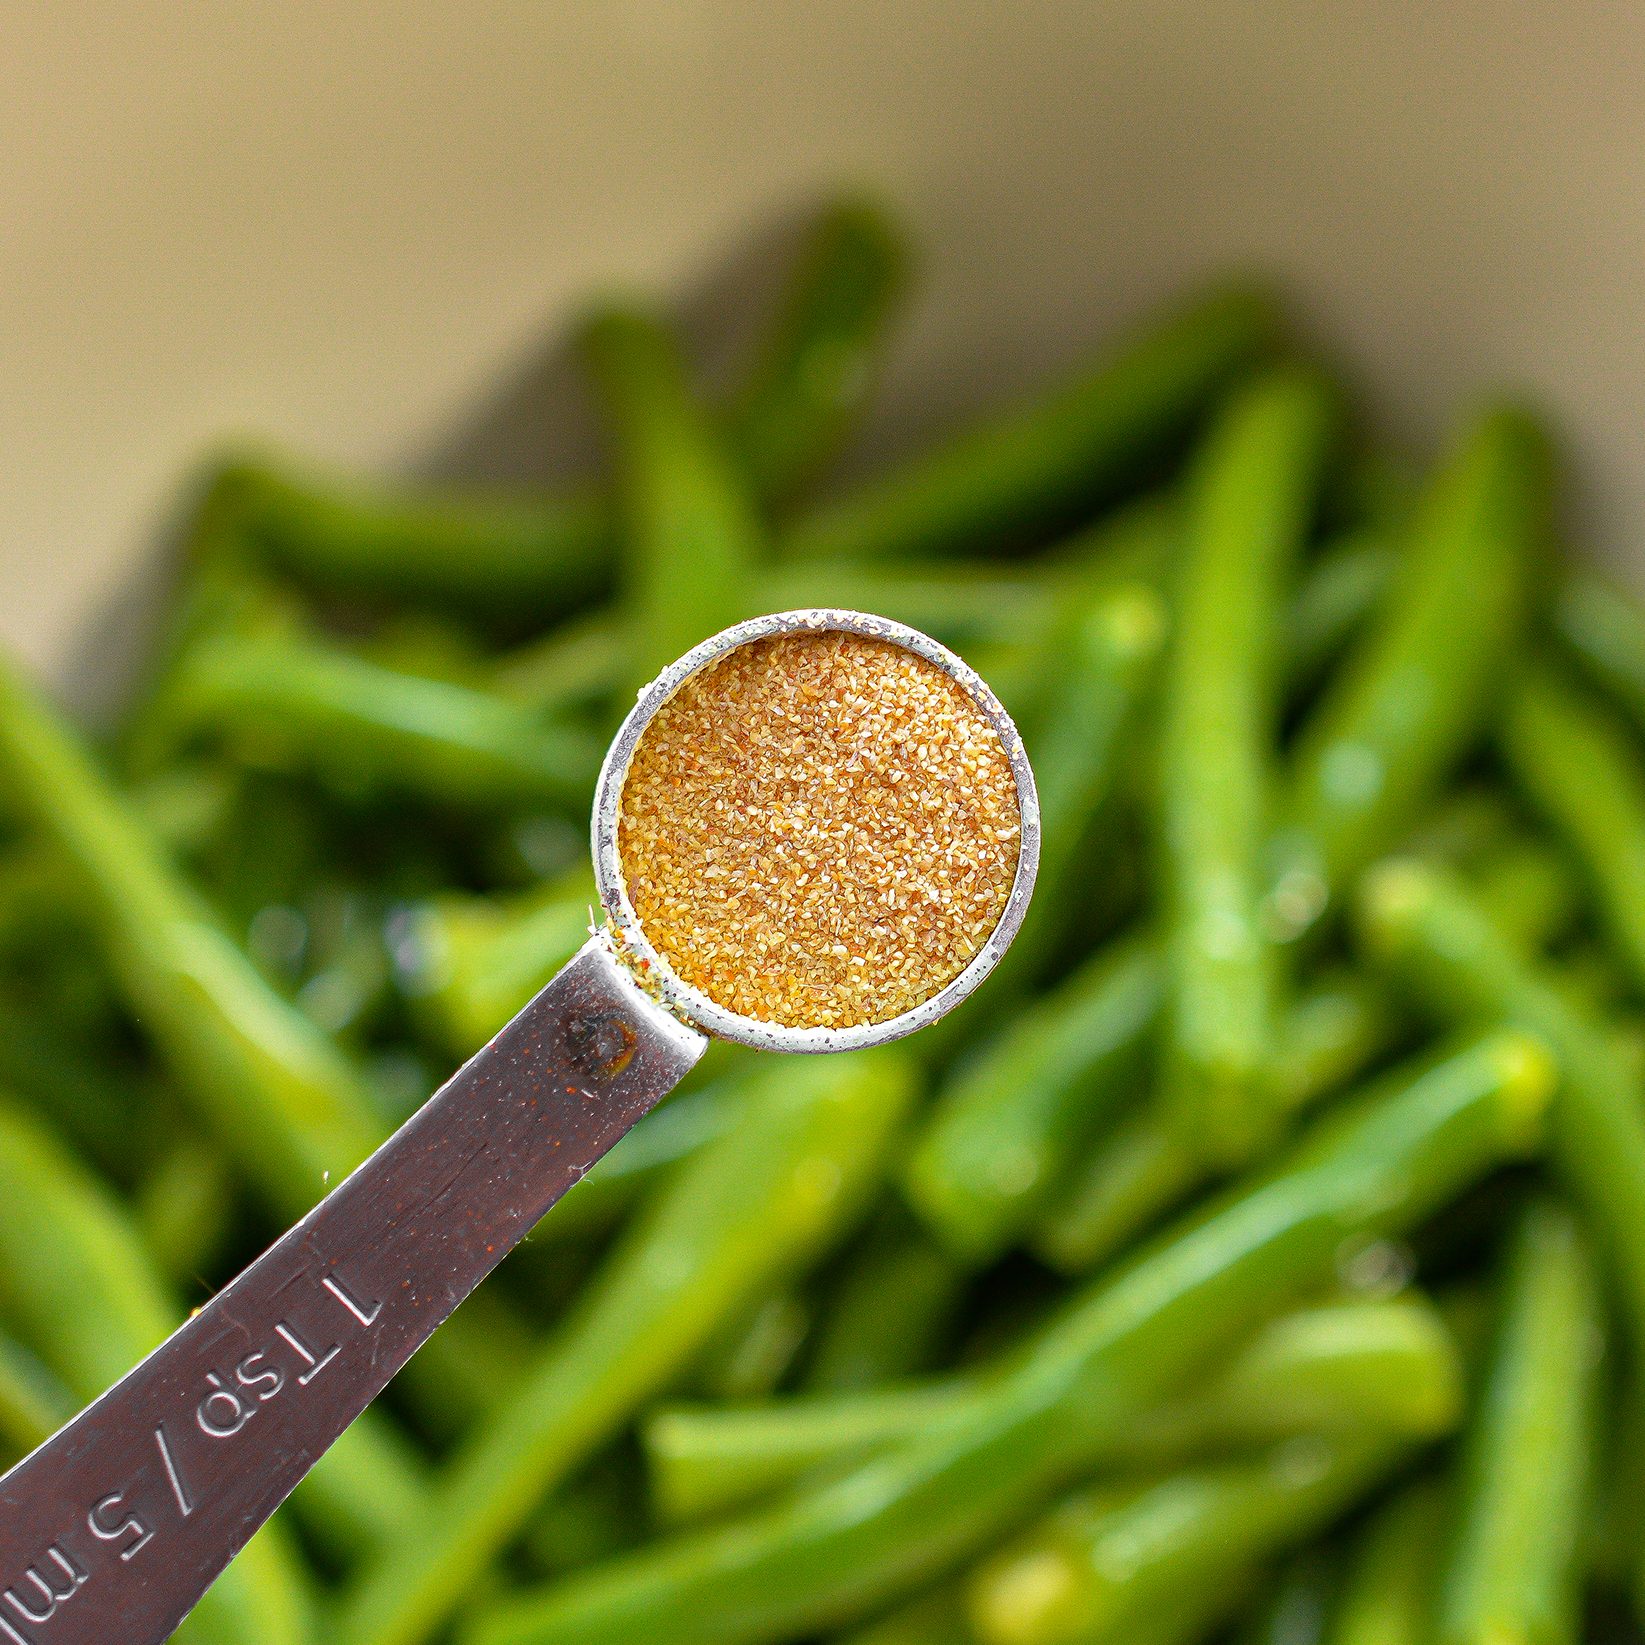 In a mixing bowl, toss the trimmed green beans in the remaining olive oil, garlic powder, and salt and pepper to taste.